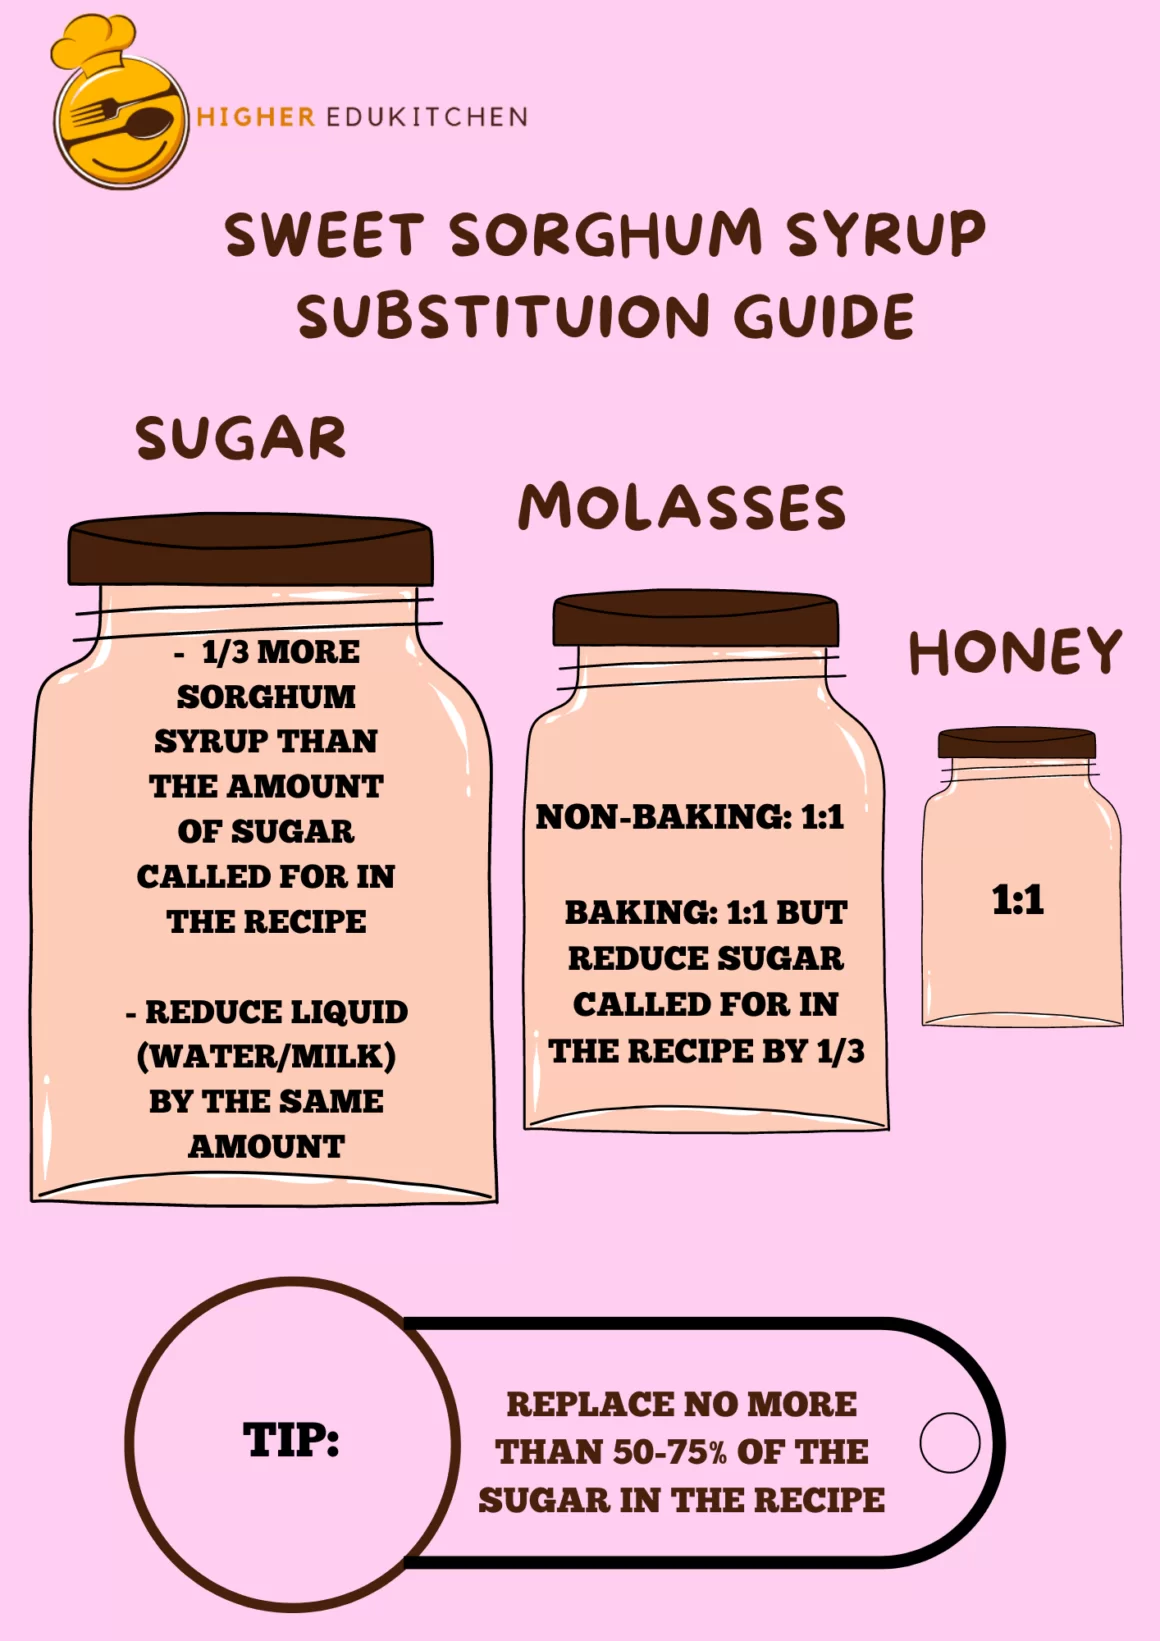 Sorghum Syrup Substitution Guide for Sugar Molasses and Honey